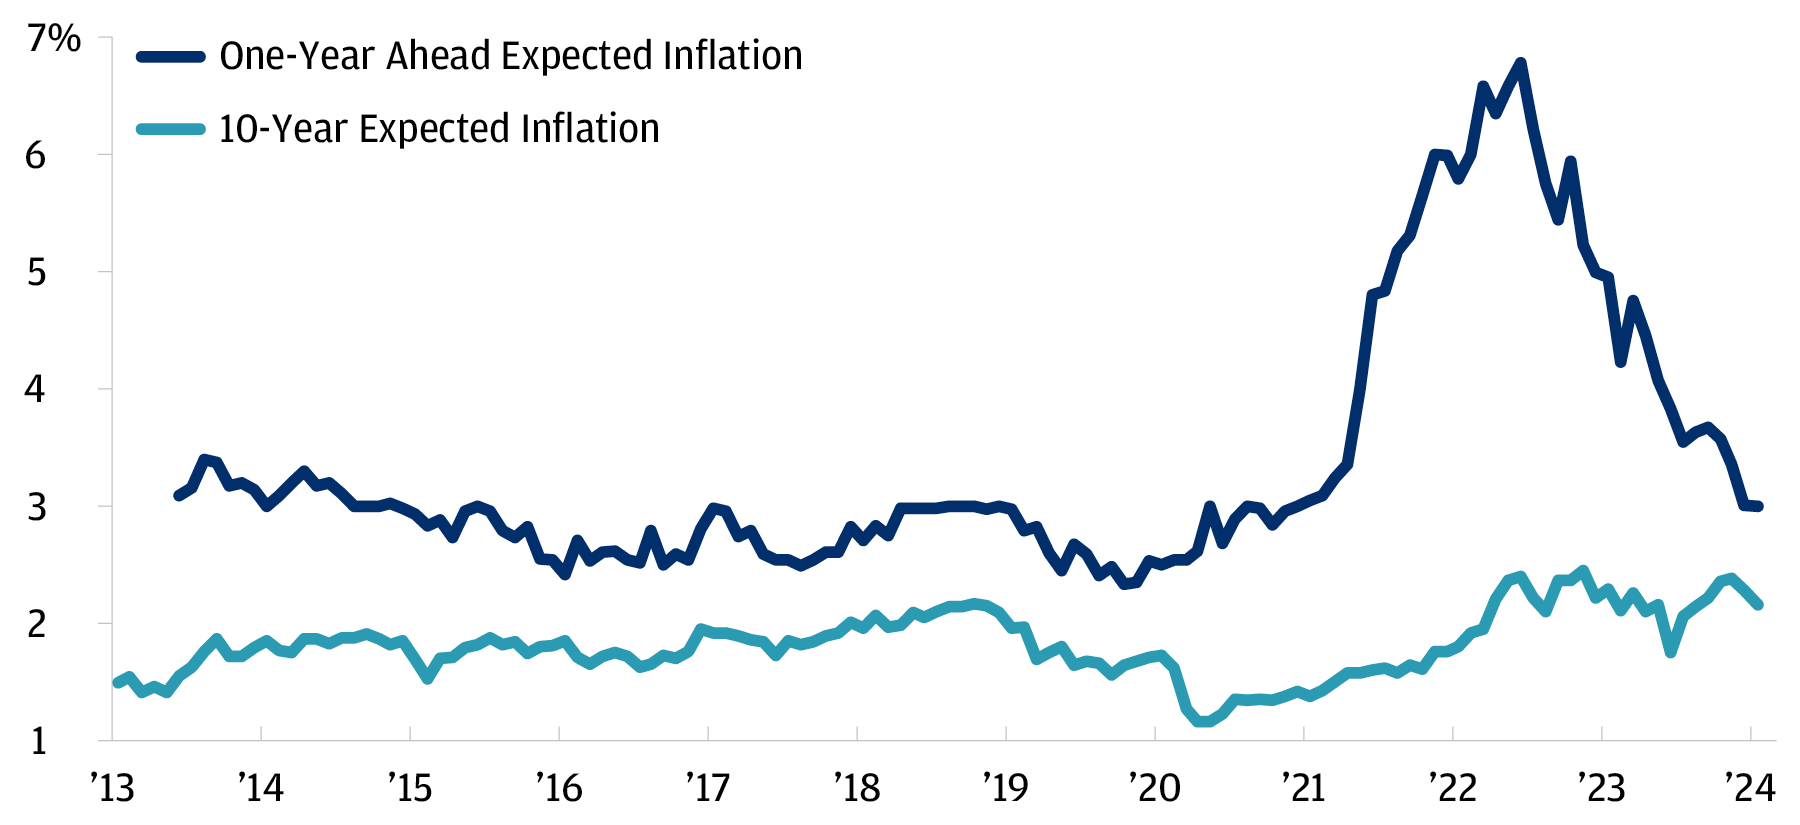 The chart describes the one-year ahead and 10-year ahead expected inflation in %.